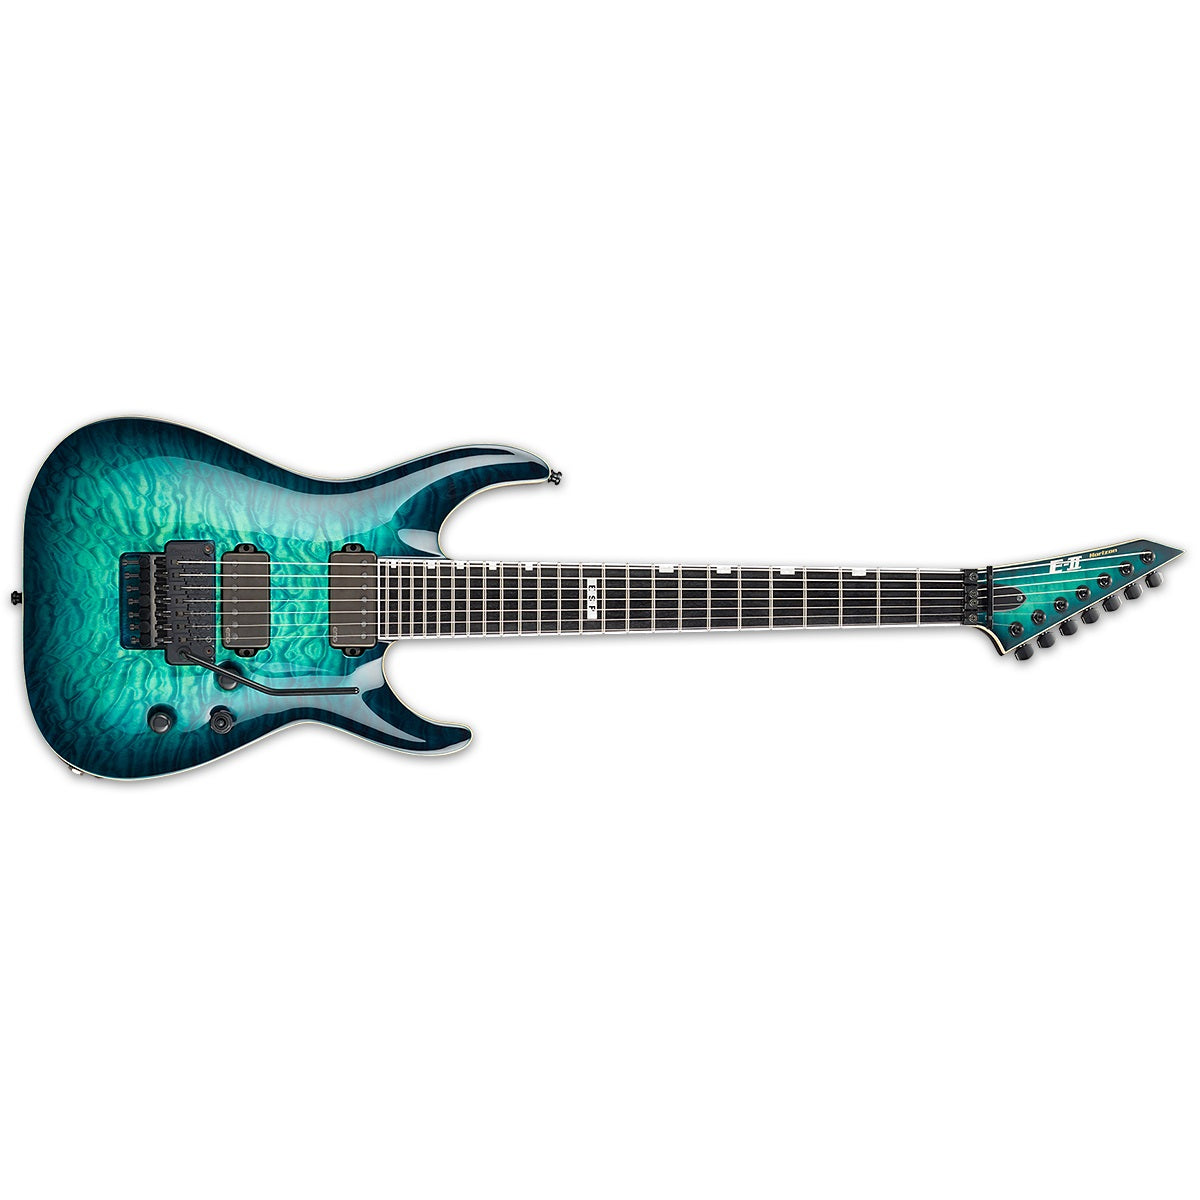 ESP E-II Horizon FR-7 Electric Guitar 7-String Quilted Maple Black Turquoise Burst w/ EMGs & Floyd Rose